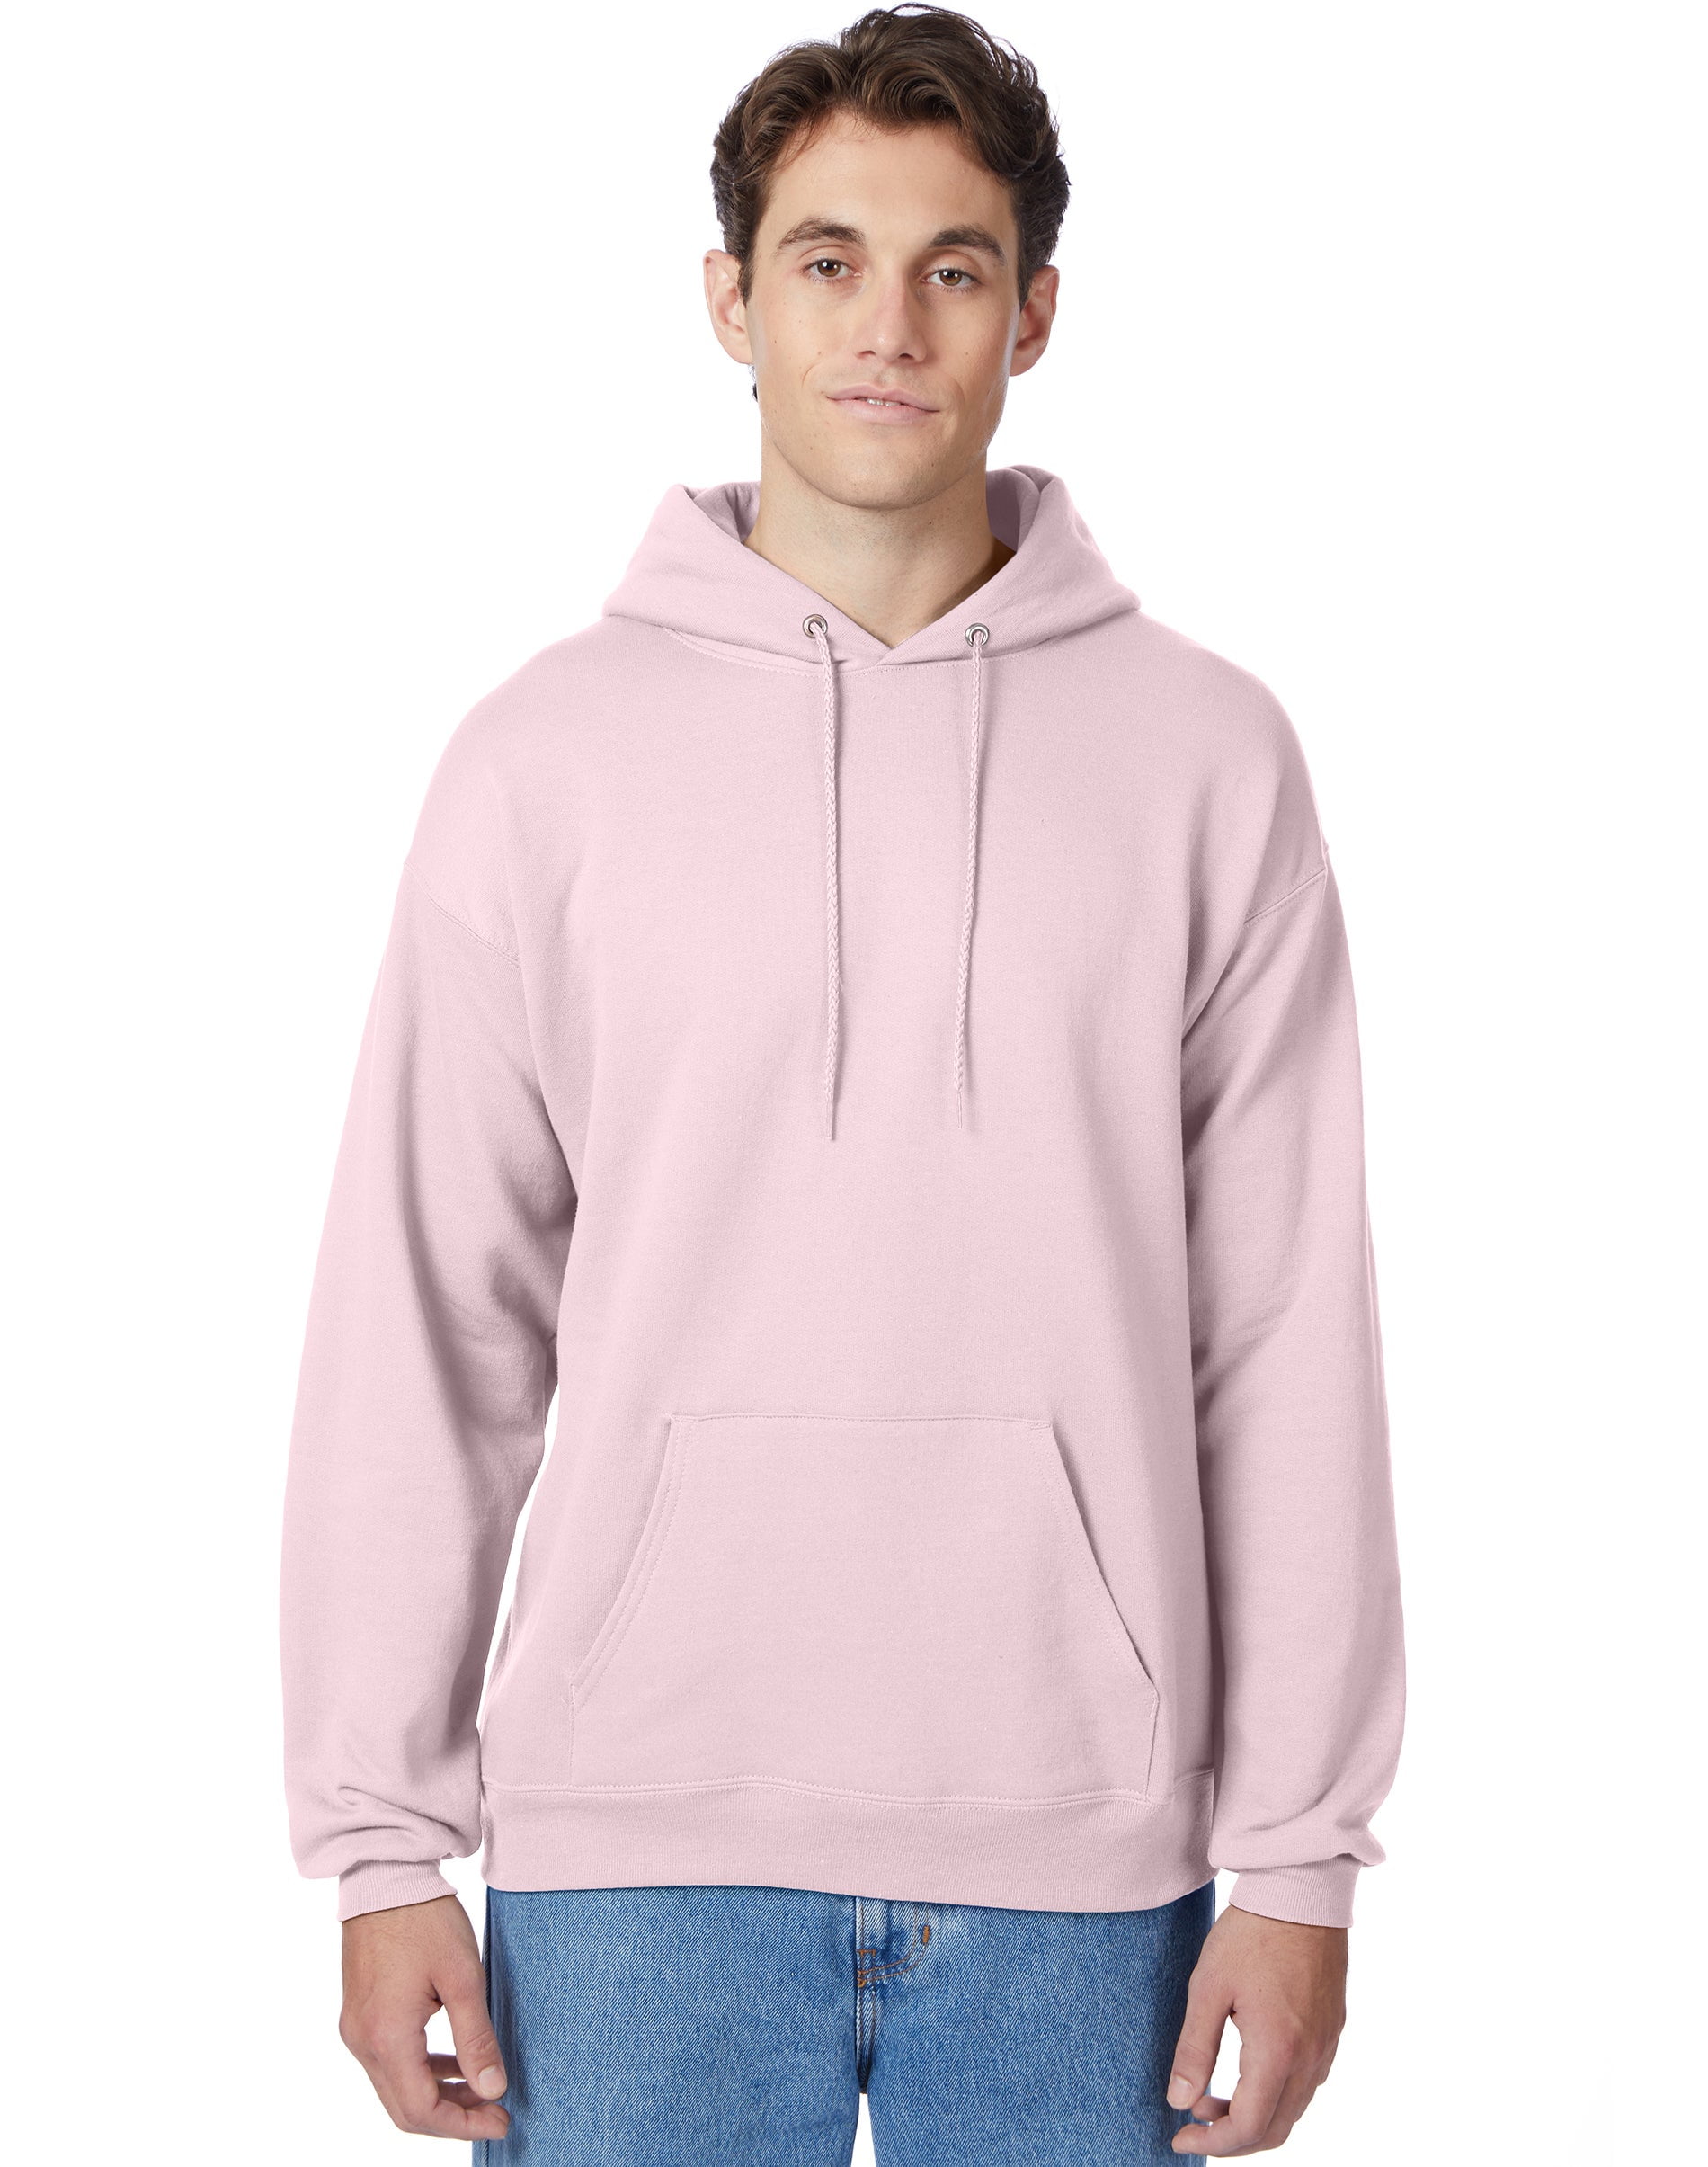 Men's Tall Pullover Hoodie Bright White